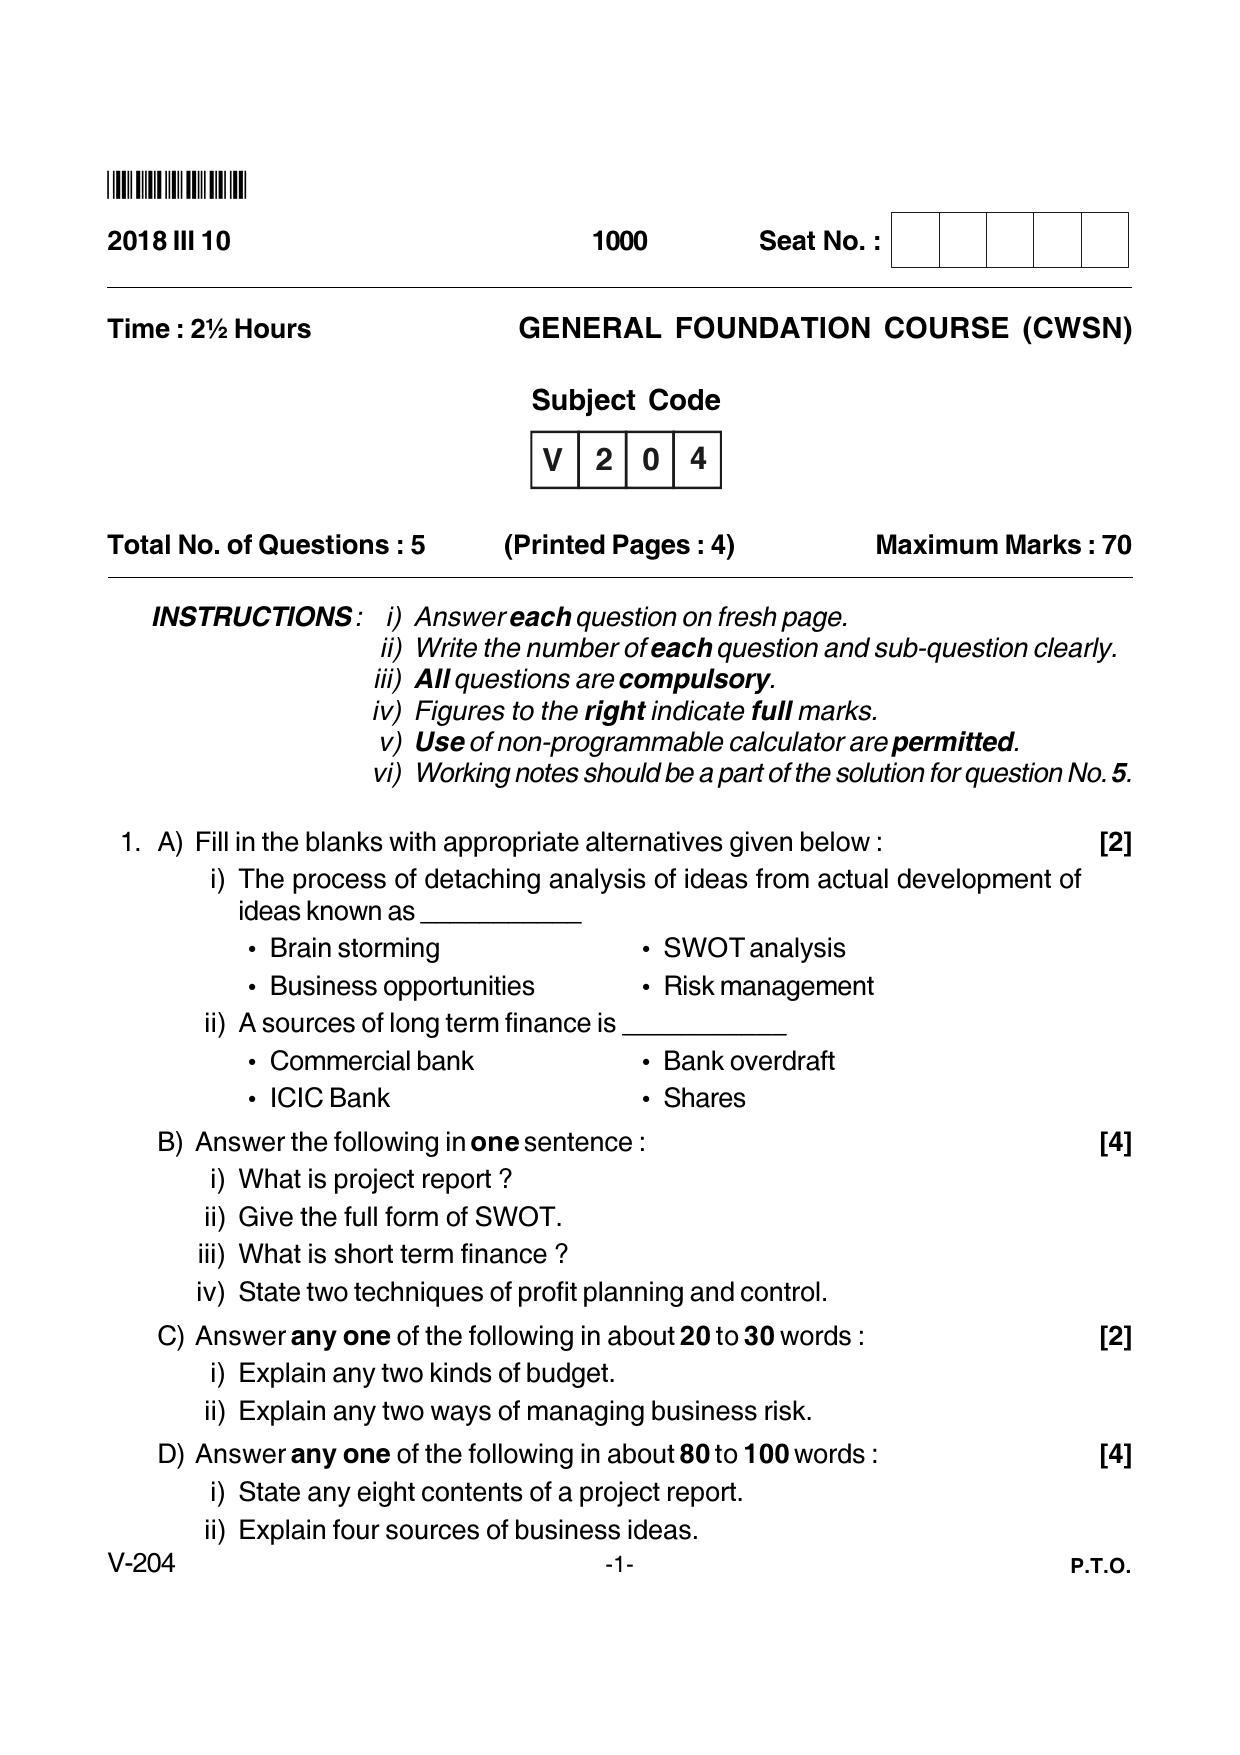 Goa Board Class 12 General Foundation Course (CWSN)  Voc 204 Cwsn (1) (March 2018) Question Paper - Page 1